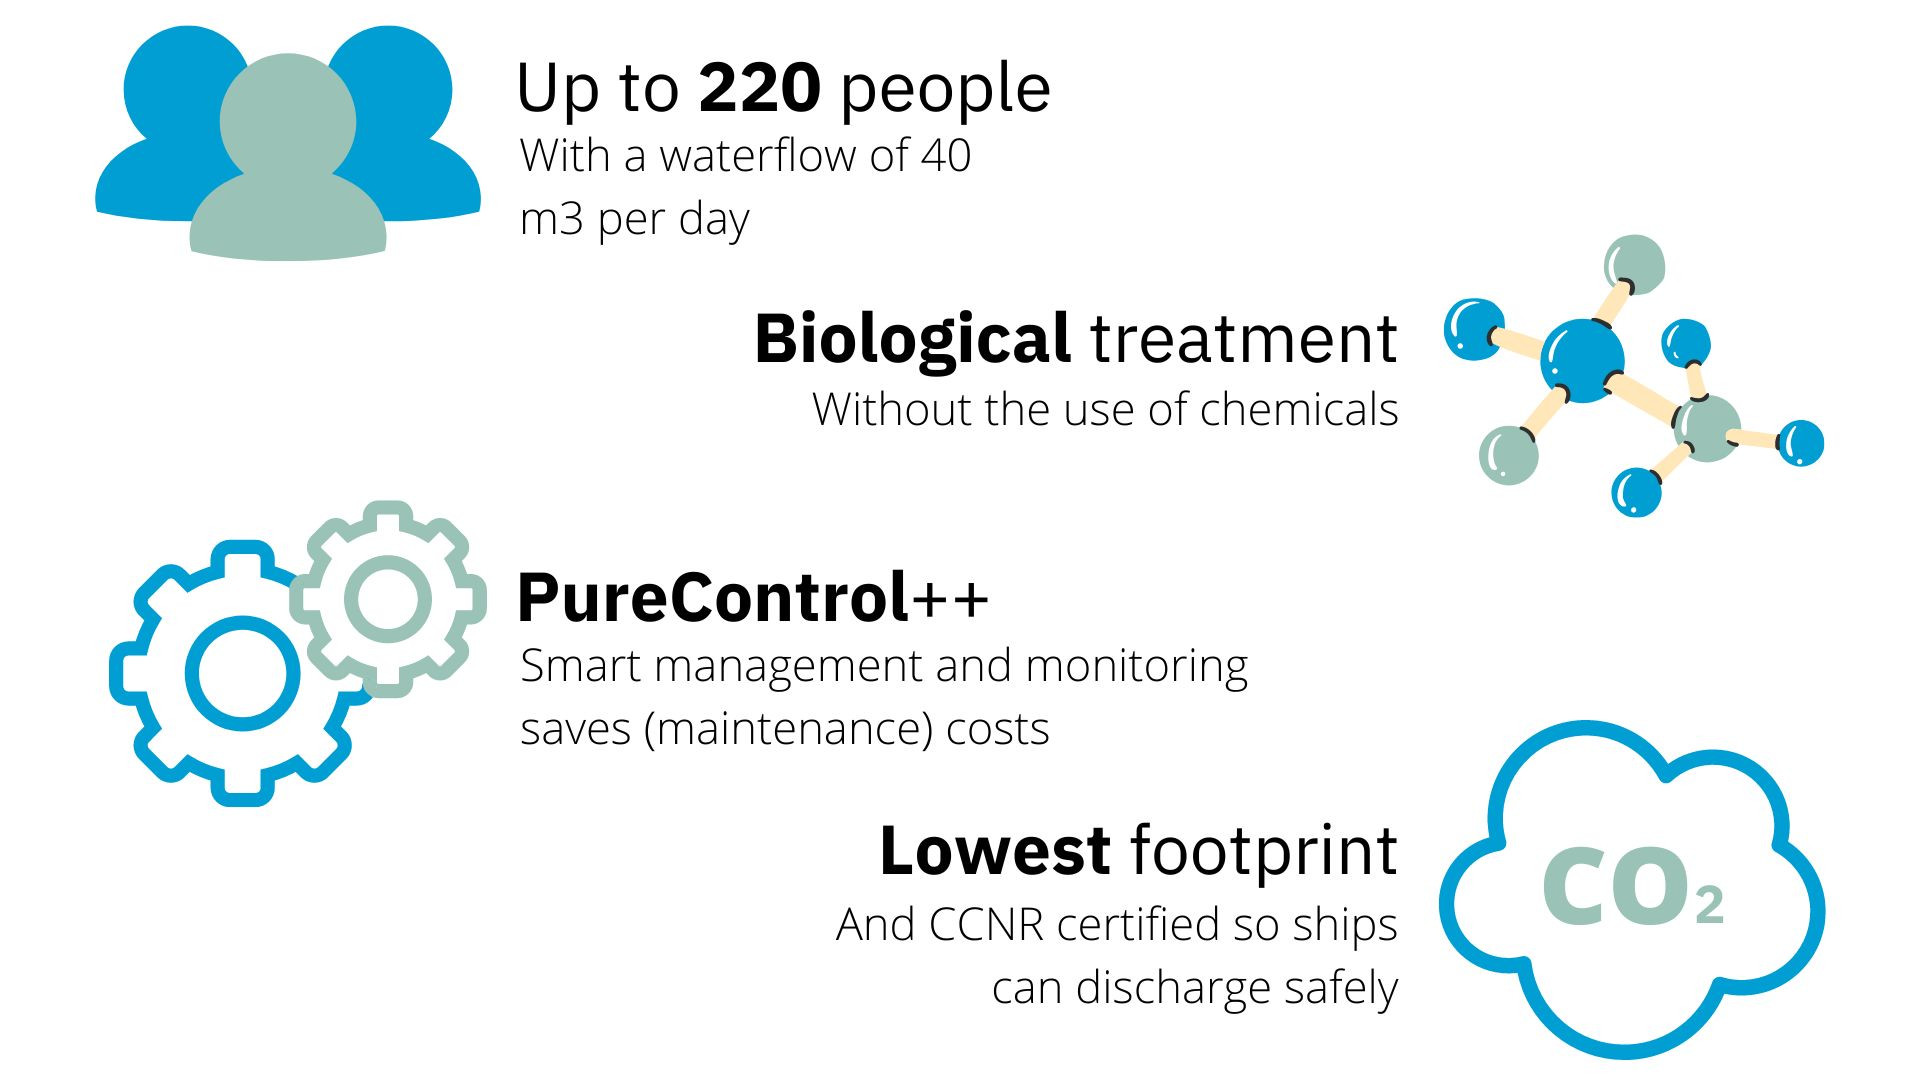 Main product benefits of the InnoPack Marine 4.0: Up to 220 people, biological treatment, PureControl++ and lowest footprint